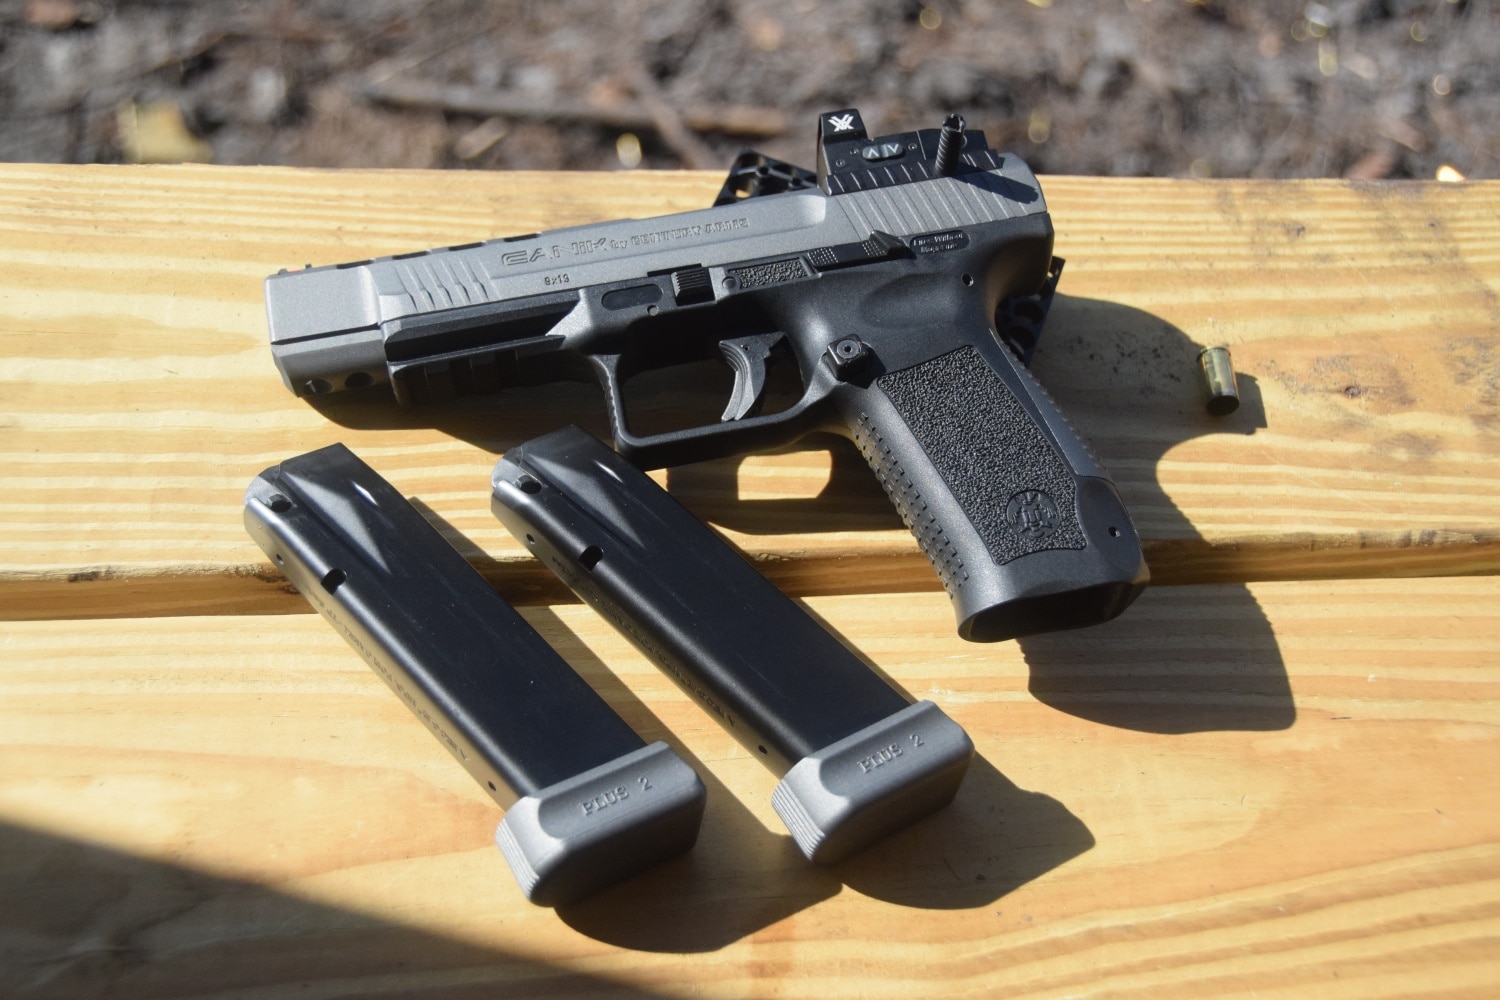 The TP9SFx will now ship with a Vortex optic allowing competition shooters an affordable race gun out of the box. (Photo: Nicholas C via The Firearm Blog)